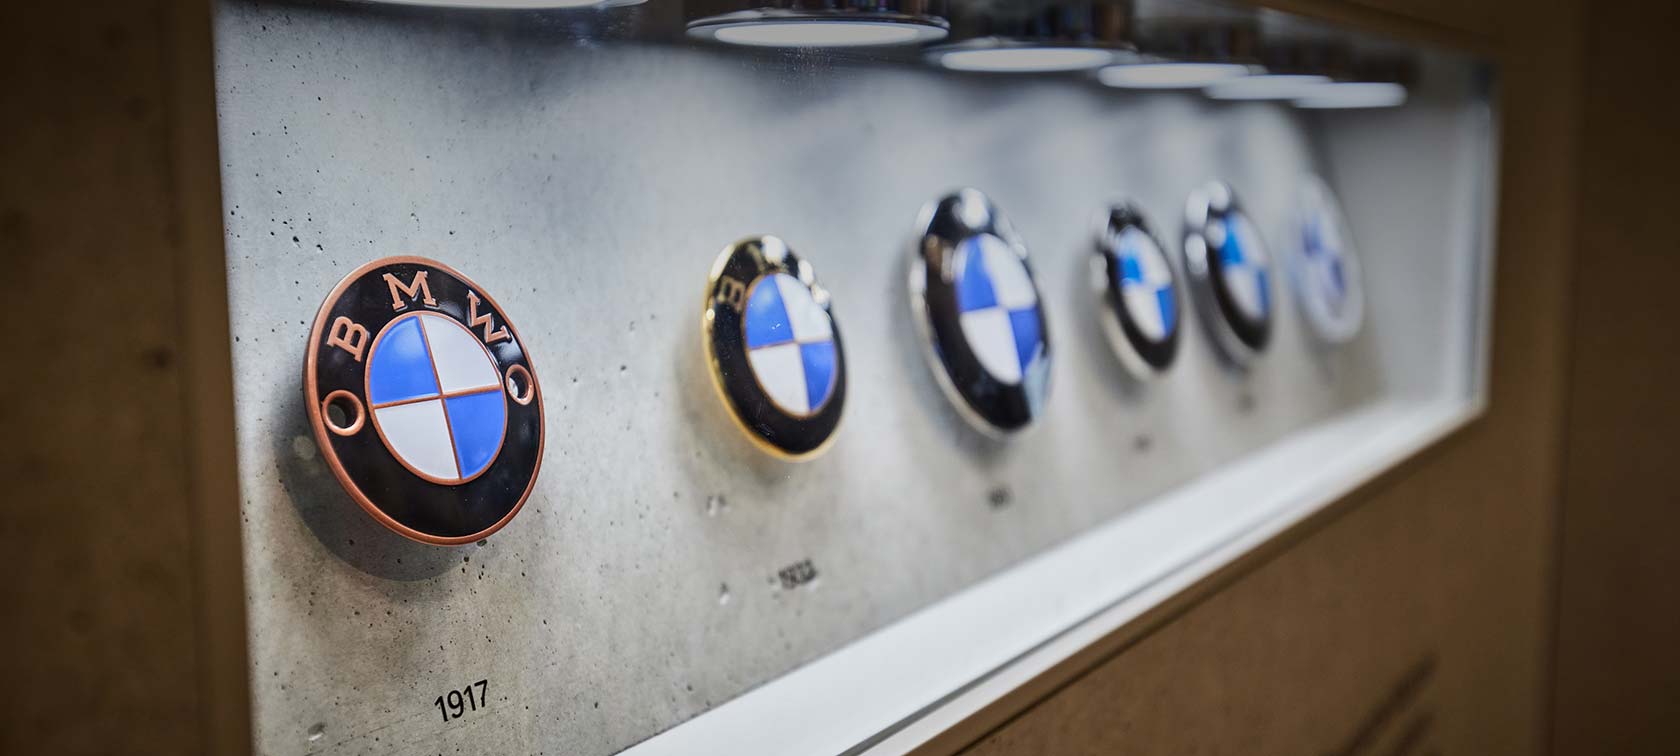 Exhibition of the development of the BMW brand logo since 1917 in the BMW Museum